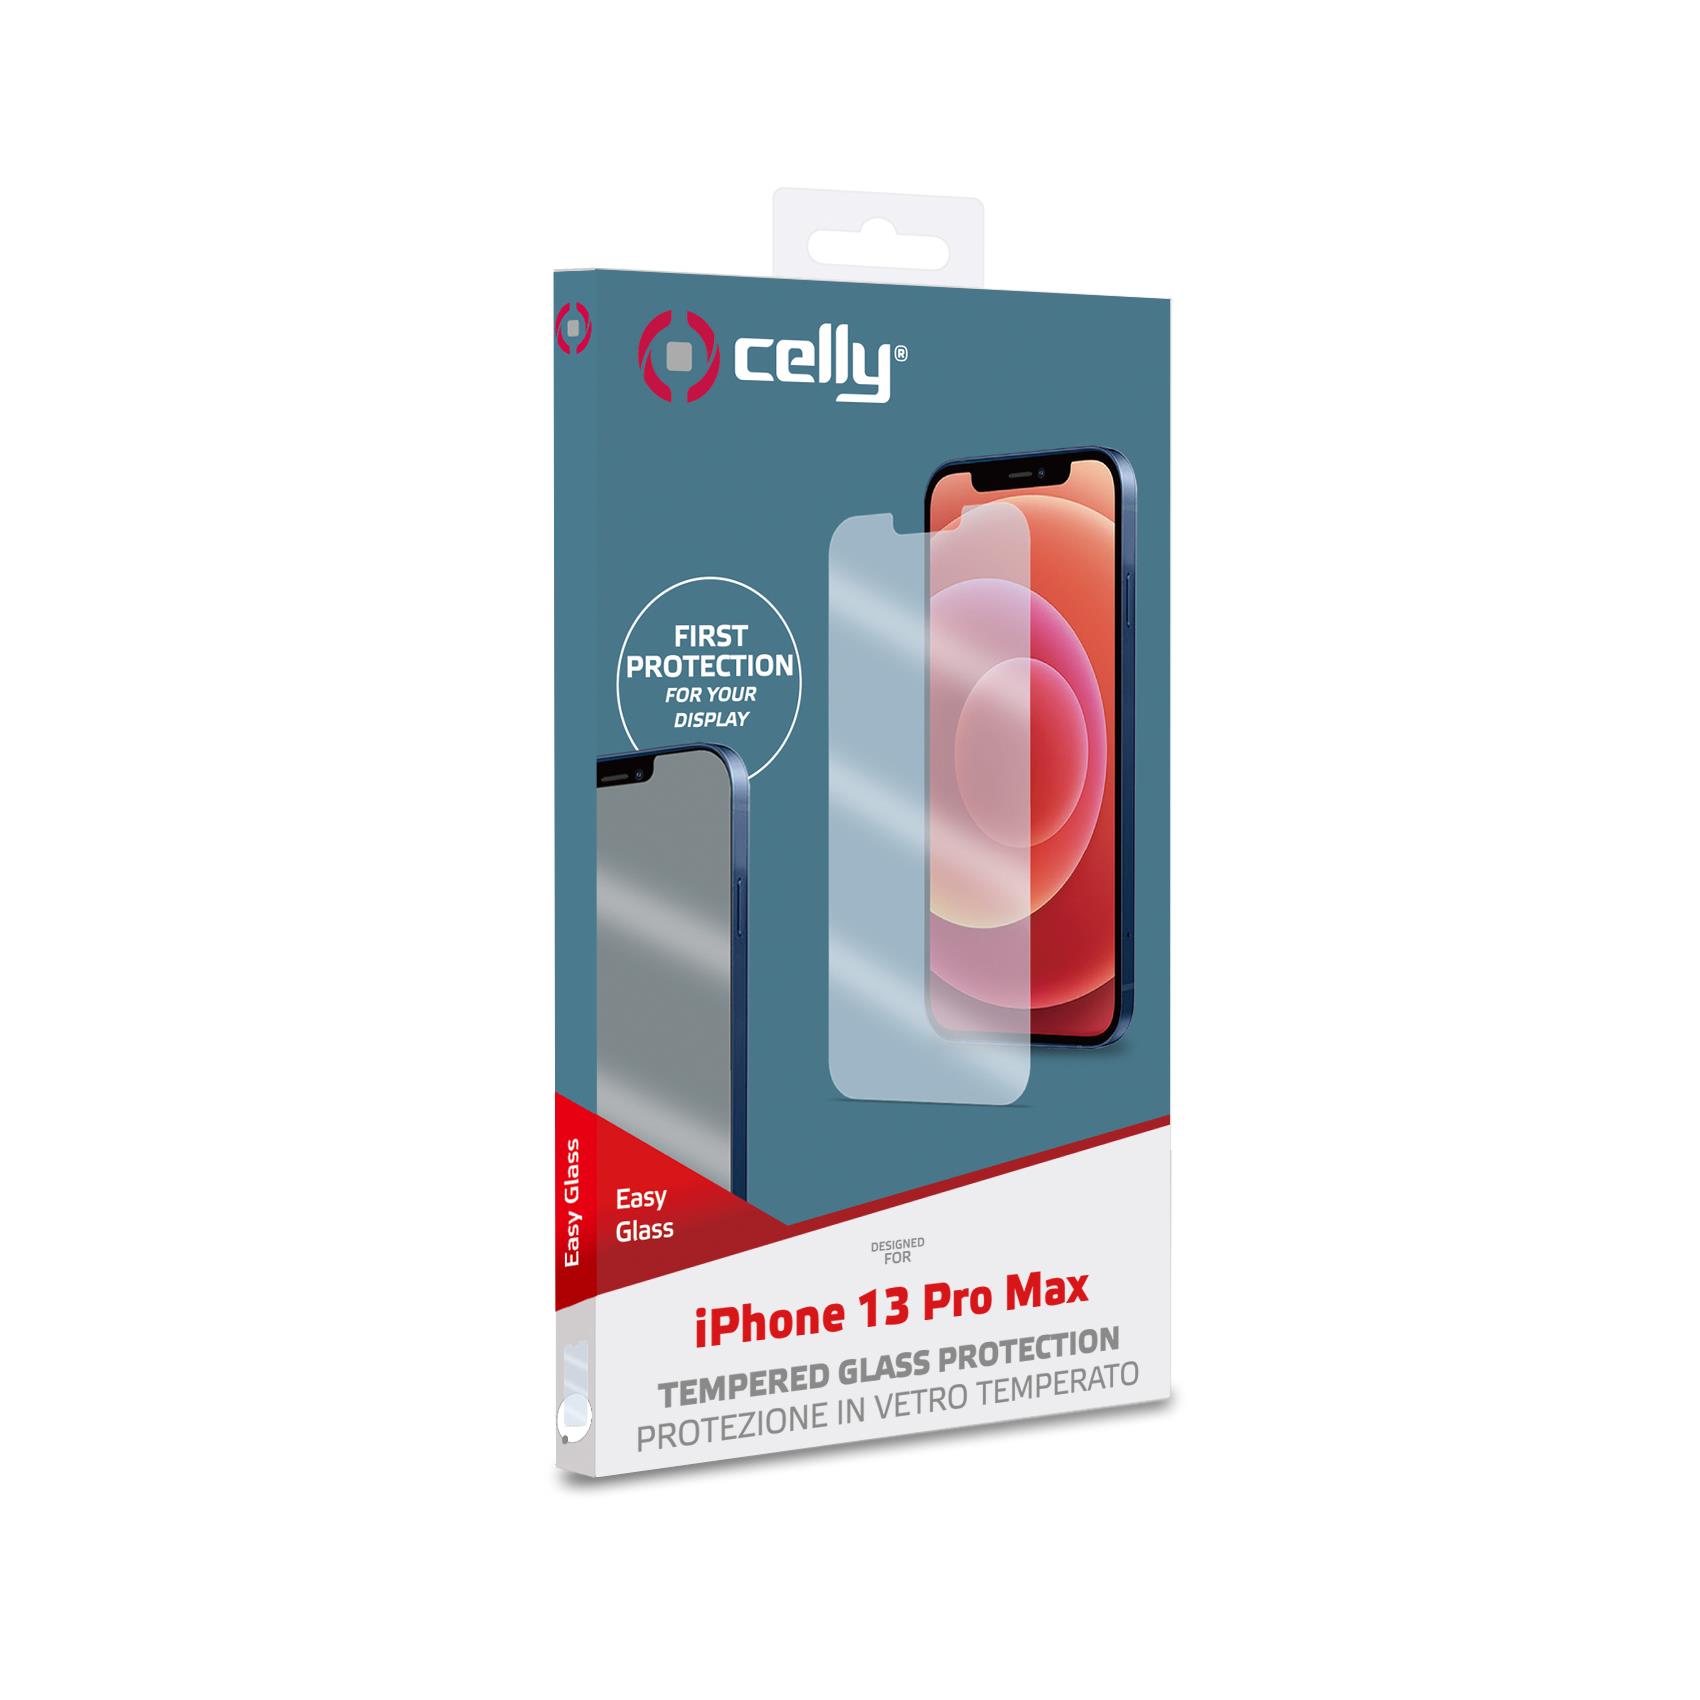 Easy Glass Iphone 13 Pro Max Celly Easy1009 8021735190349